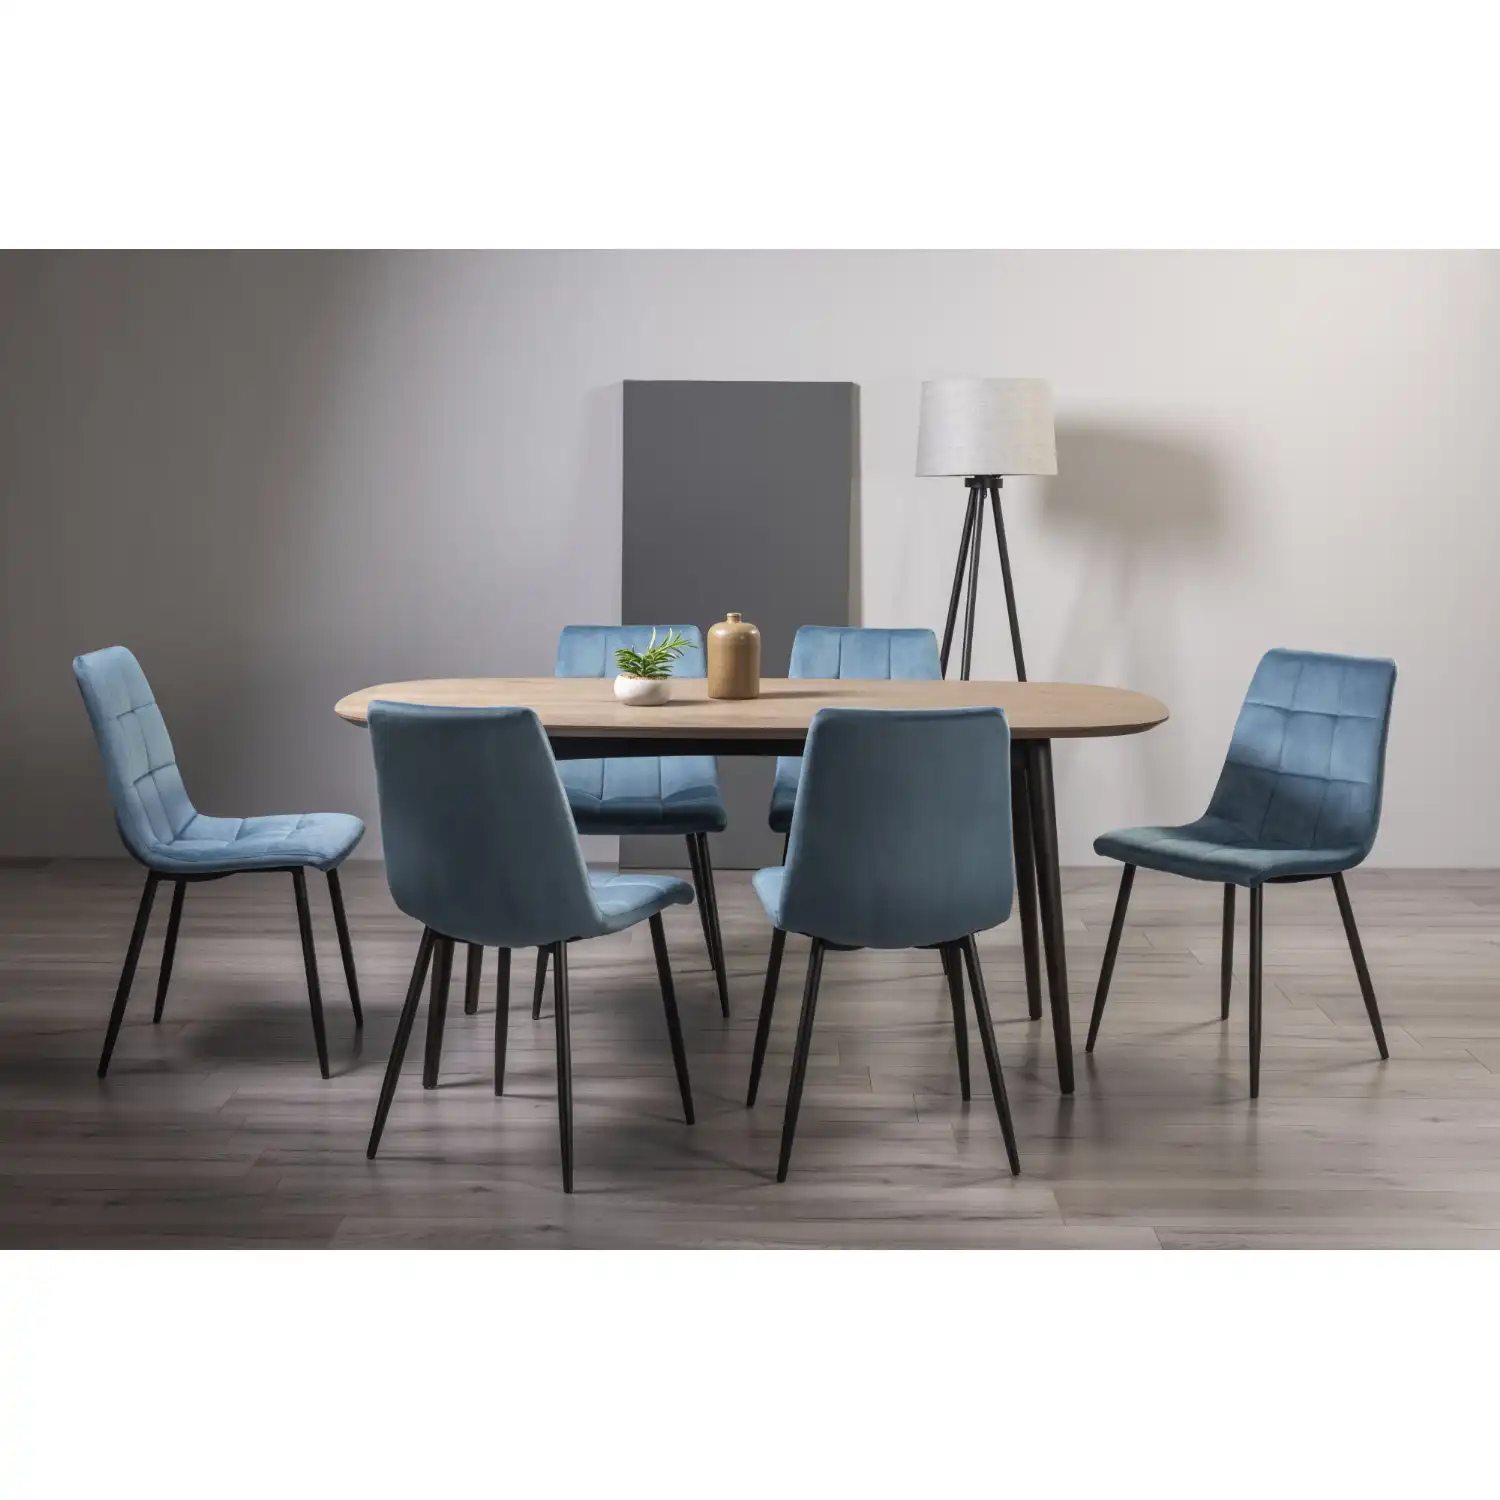 Weathered Oak Dining Table Set with 6 Blue Velvet Chairs